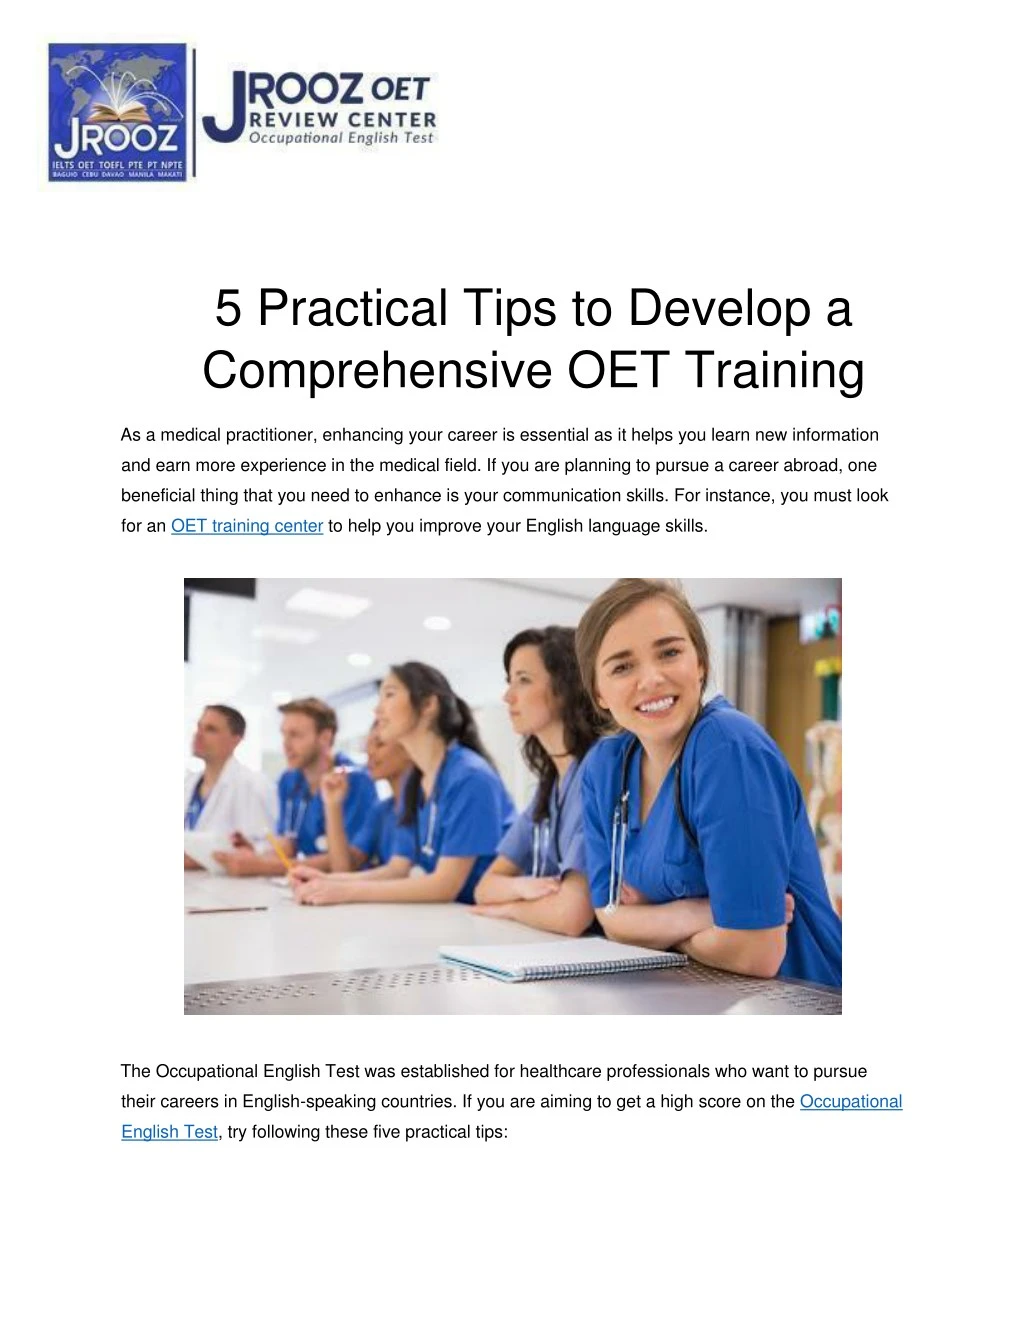 5 practical tips to develop a comprehensive